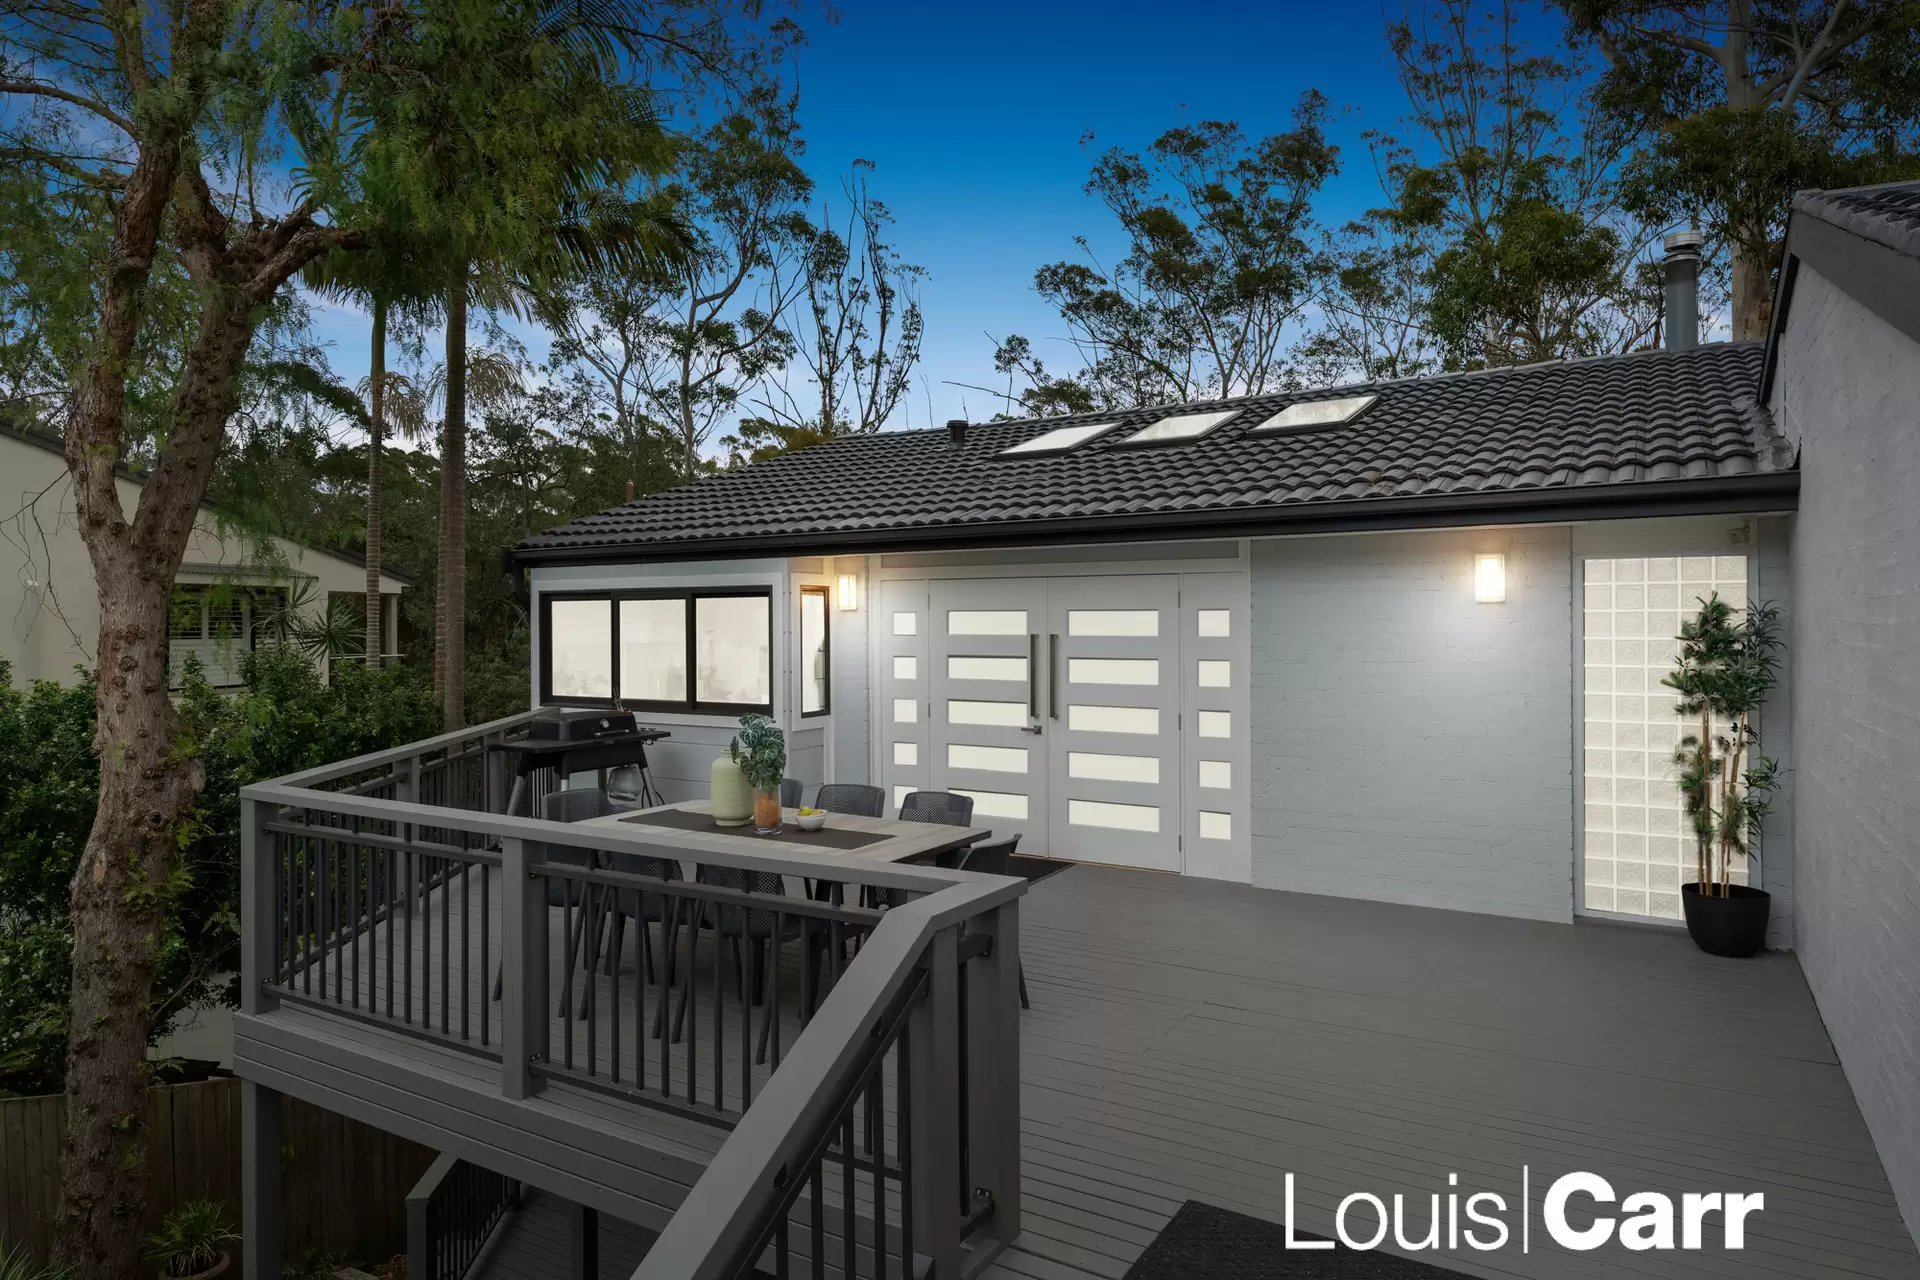 Photo #10: 13 Silky Oak Place, Castle Hill - Sold by Louis Carr Real Estate